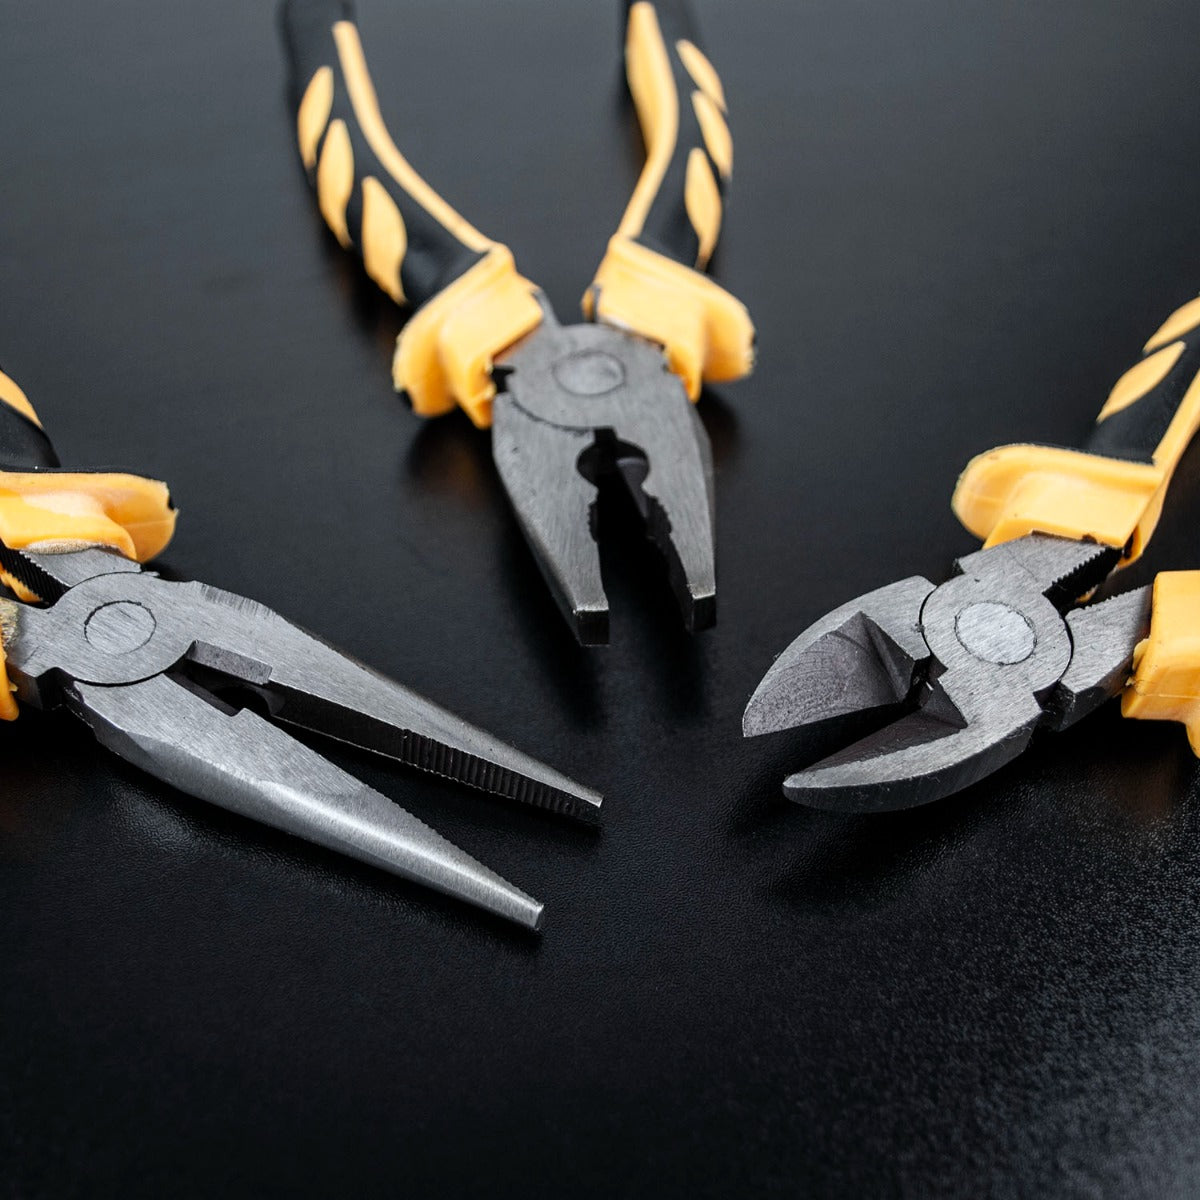 3 Pieces Soft Grip Pliers Set - Inspirely